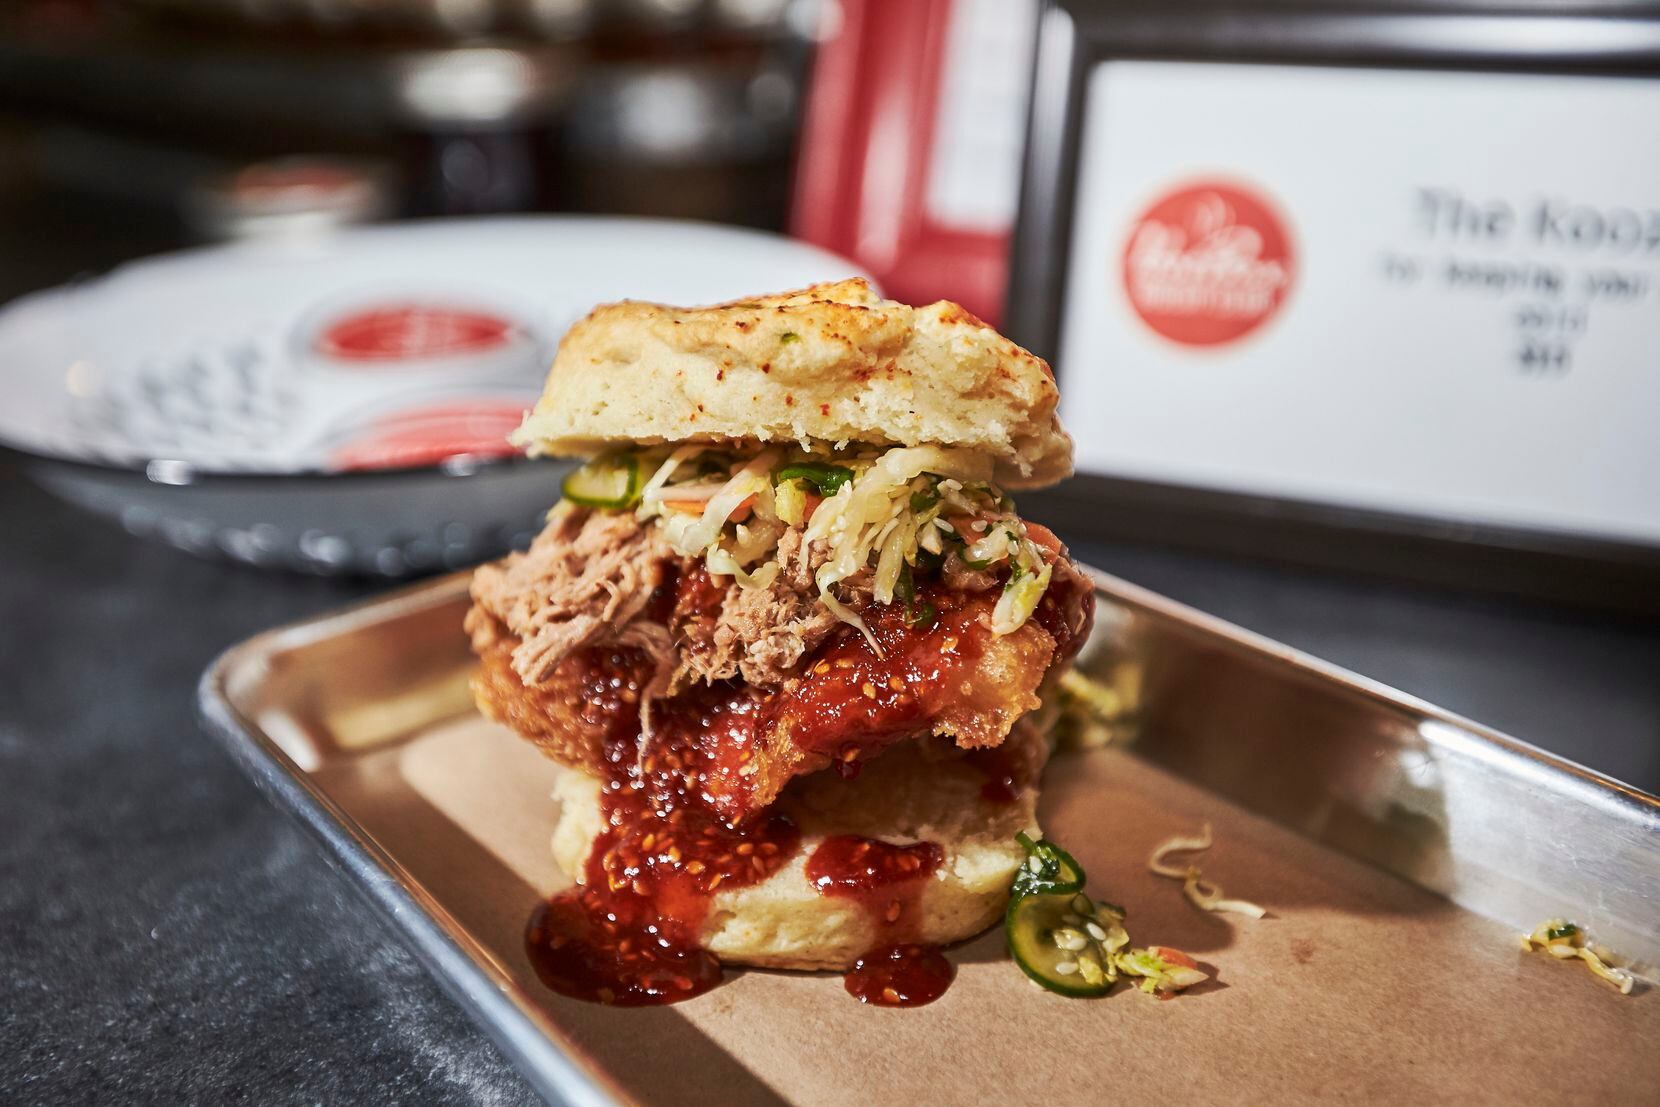 "Hot Box in Tokyo," includes fried chicken, gochujang glaze, pulled pork and Asian slaw,...